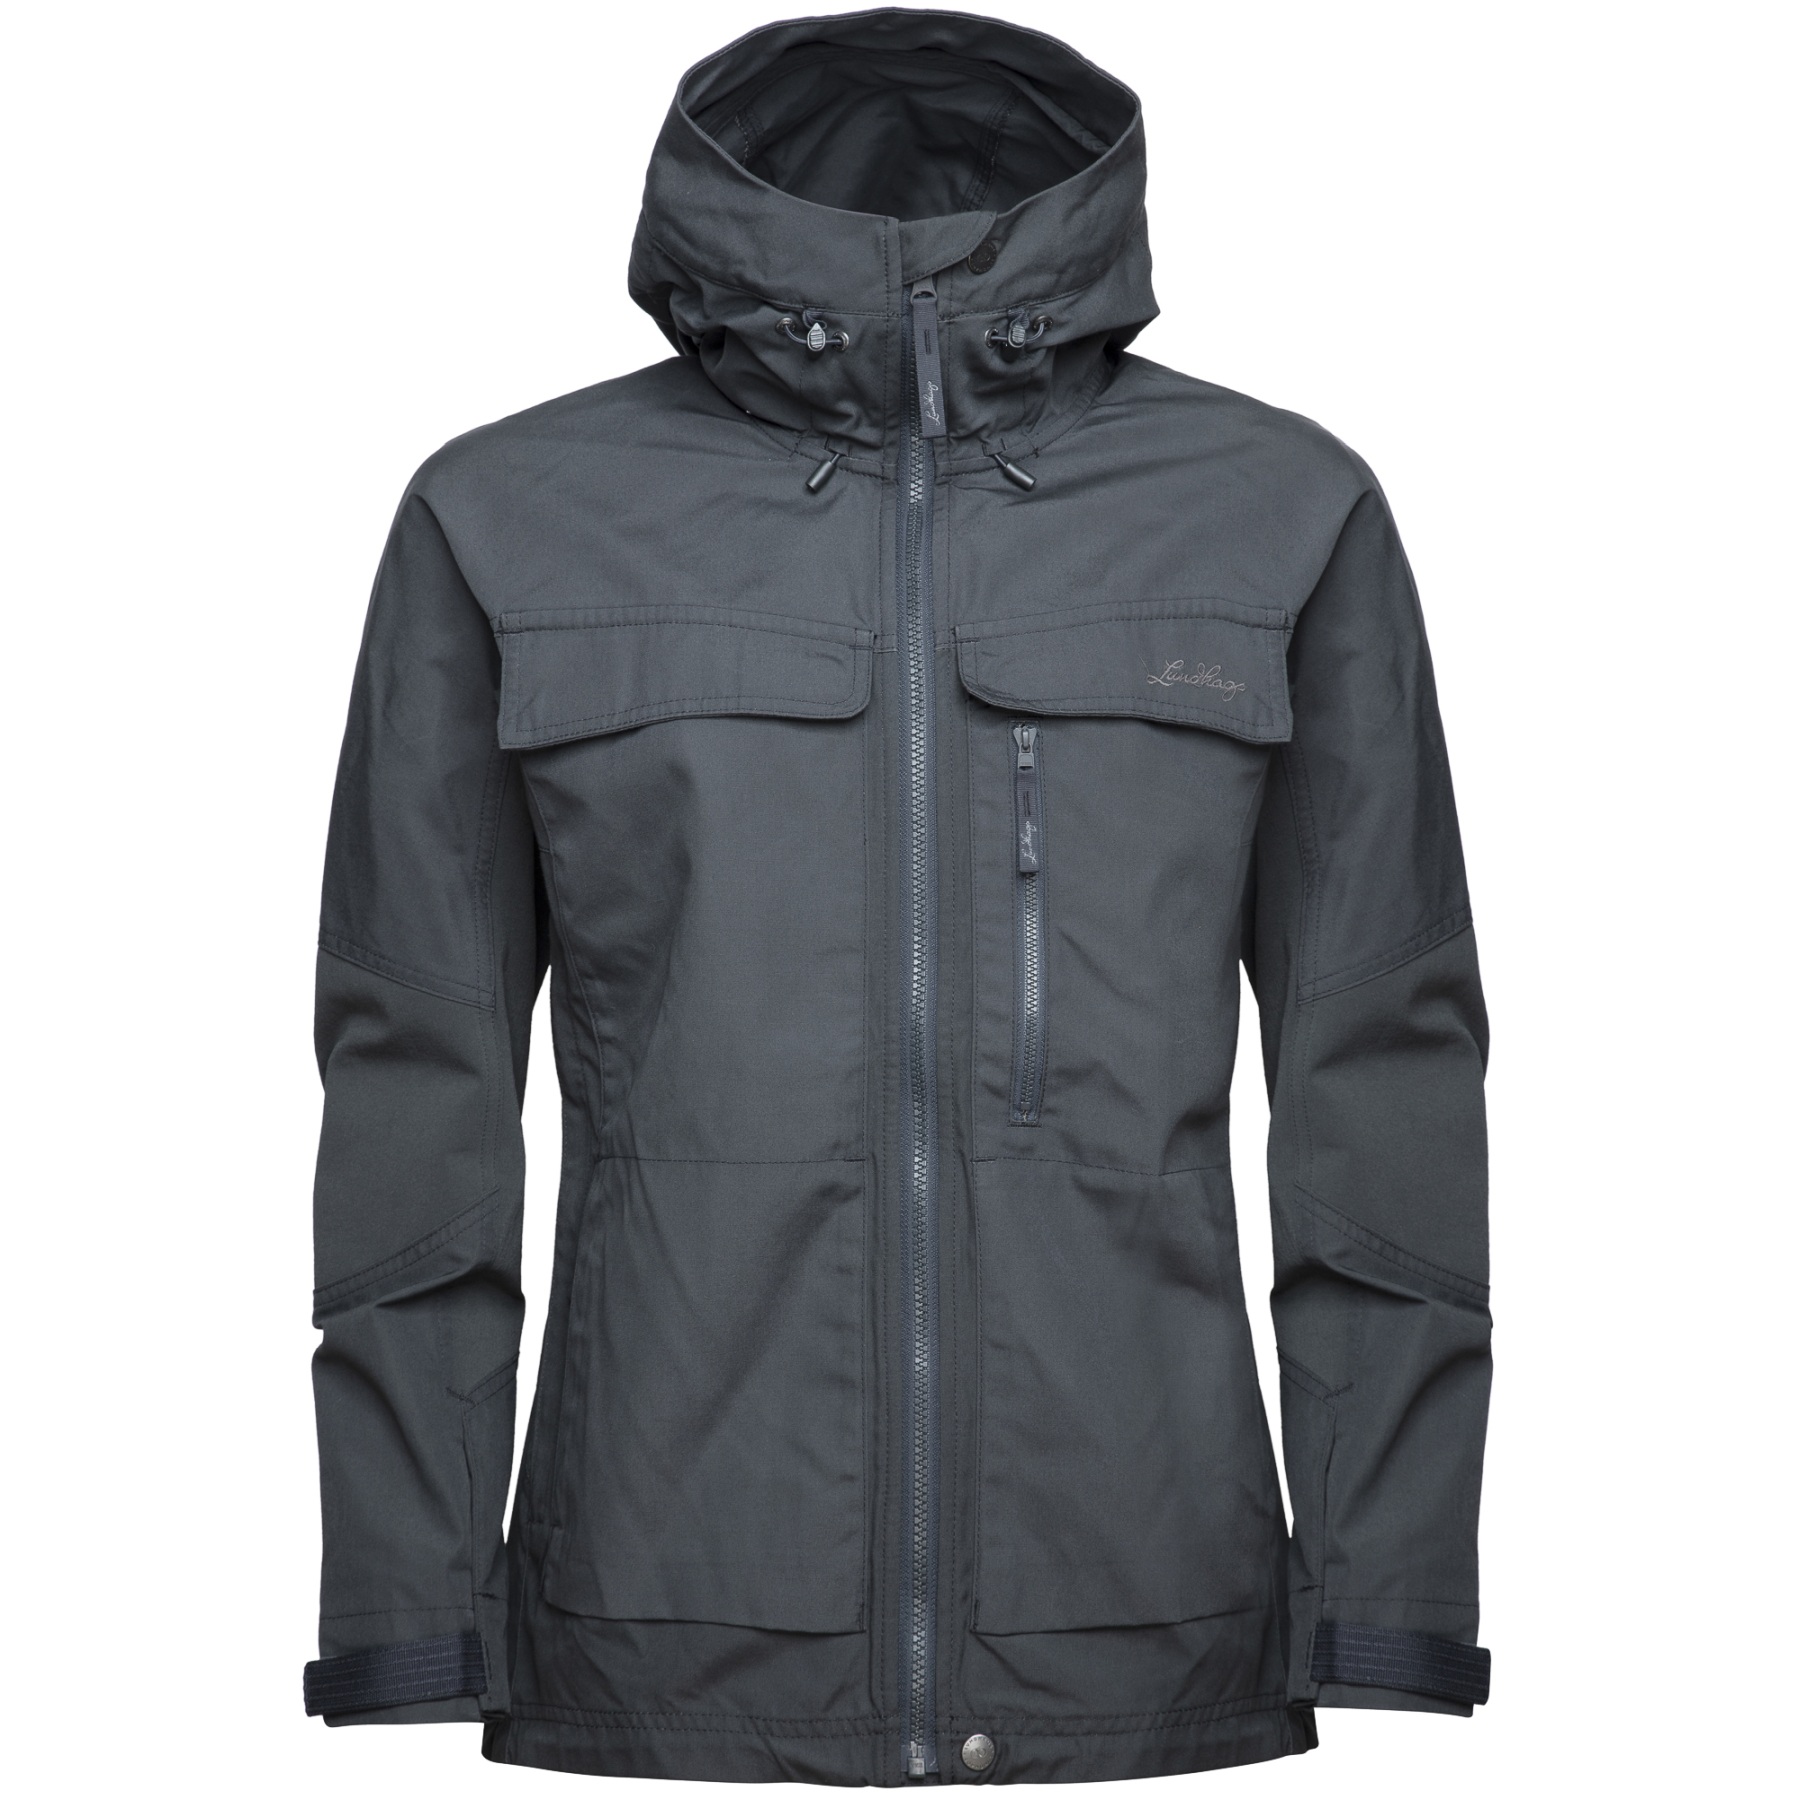 Image of Lundhags Authentic Women's Hiking Jacket - Charcoal 890